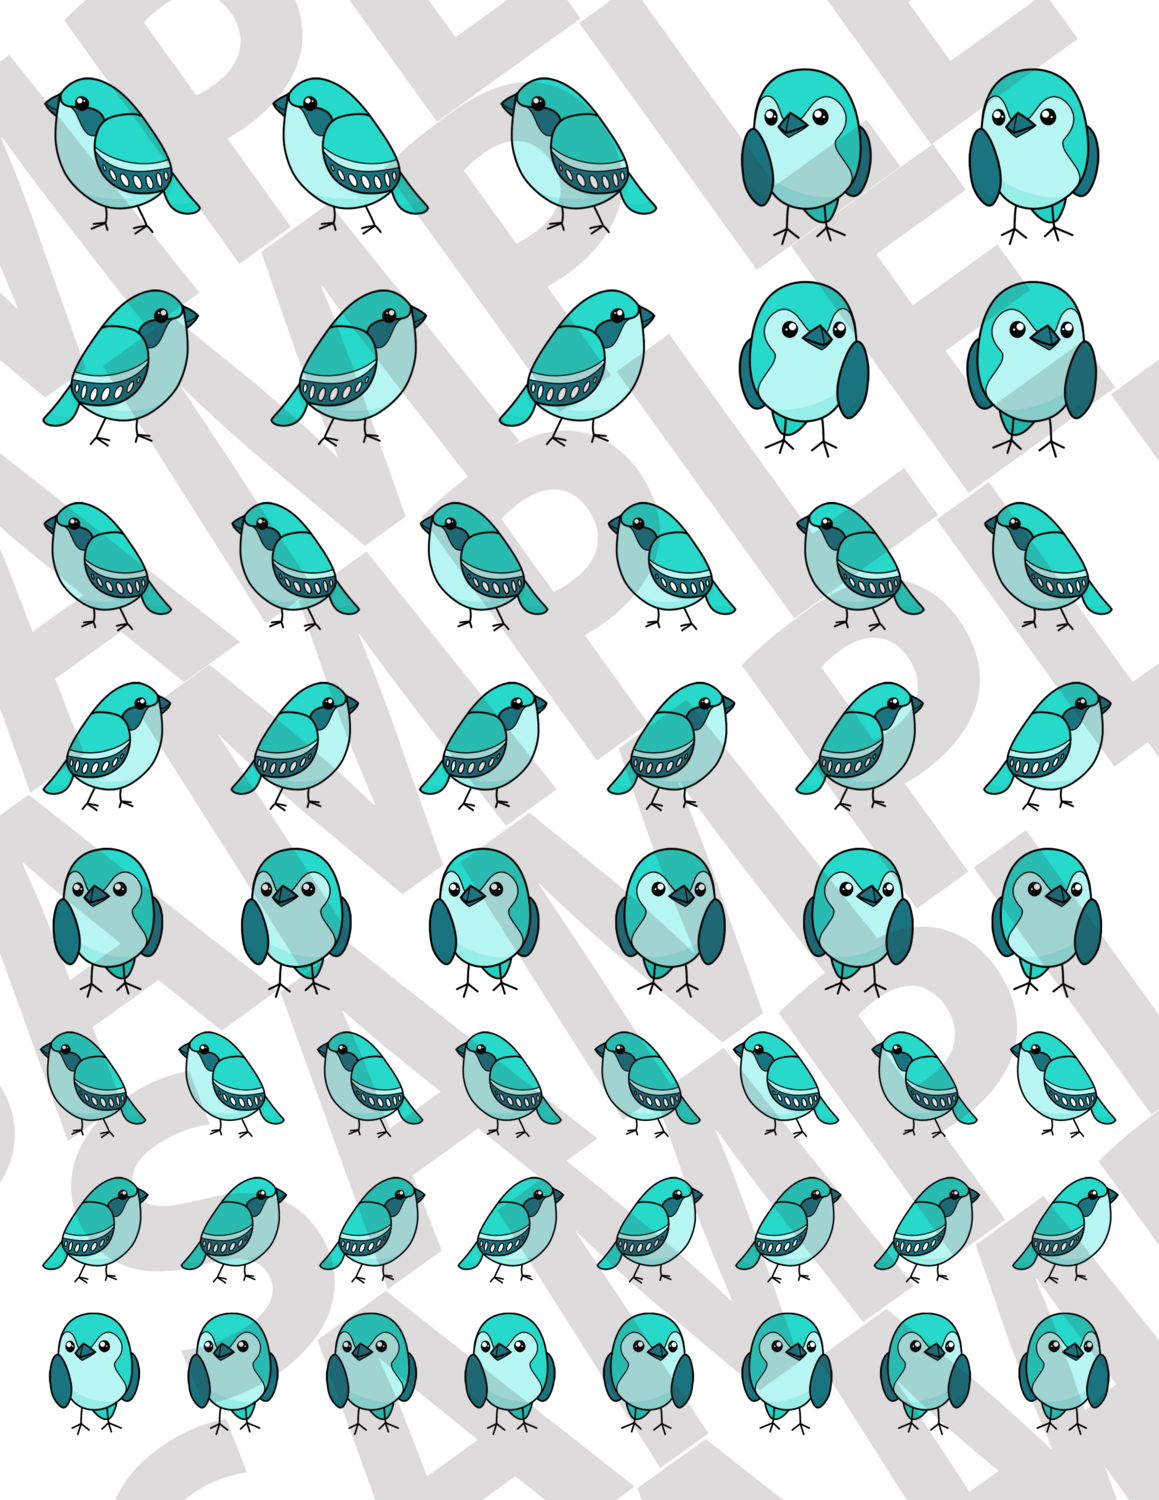 Turquoise - Smaller Simple Birds